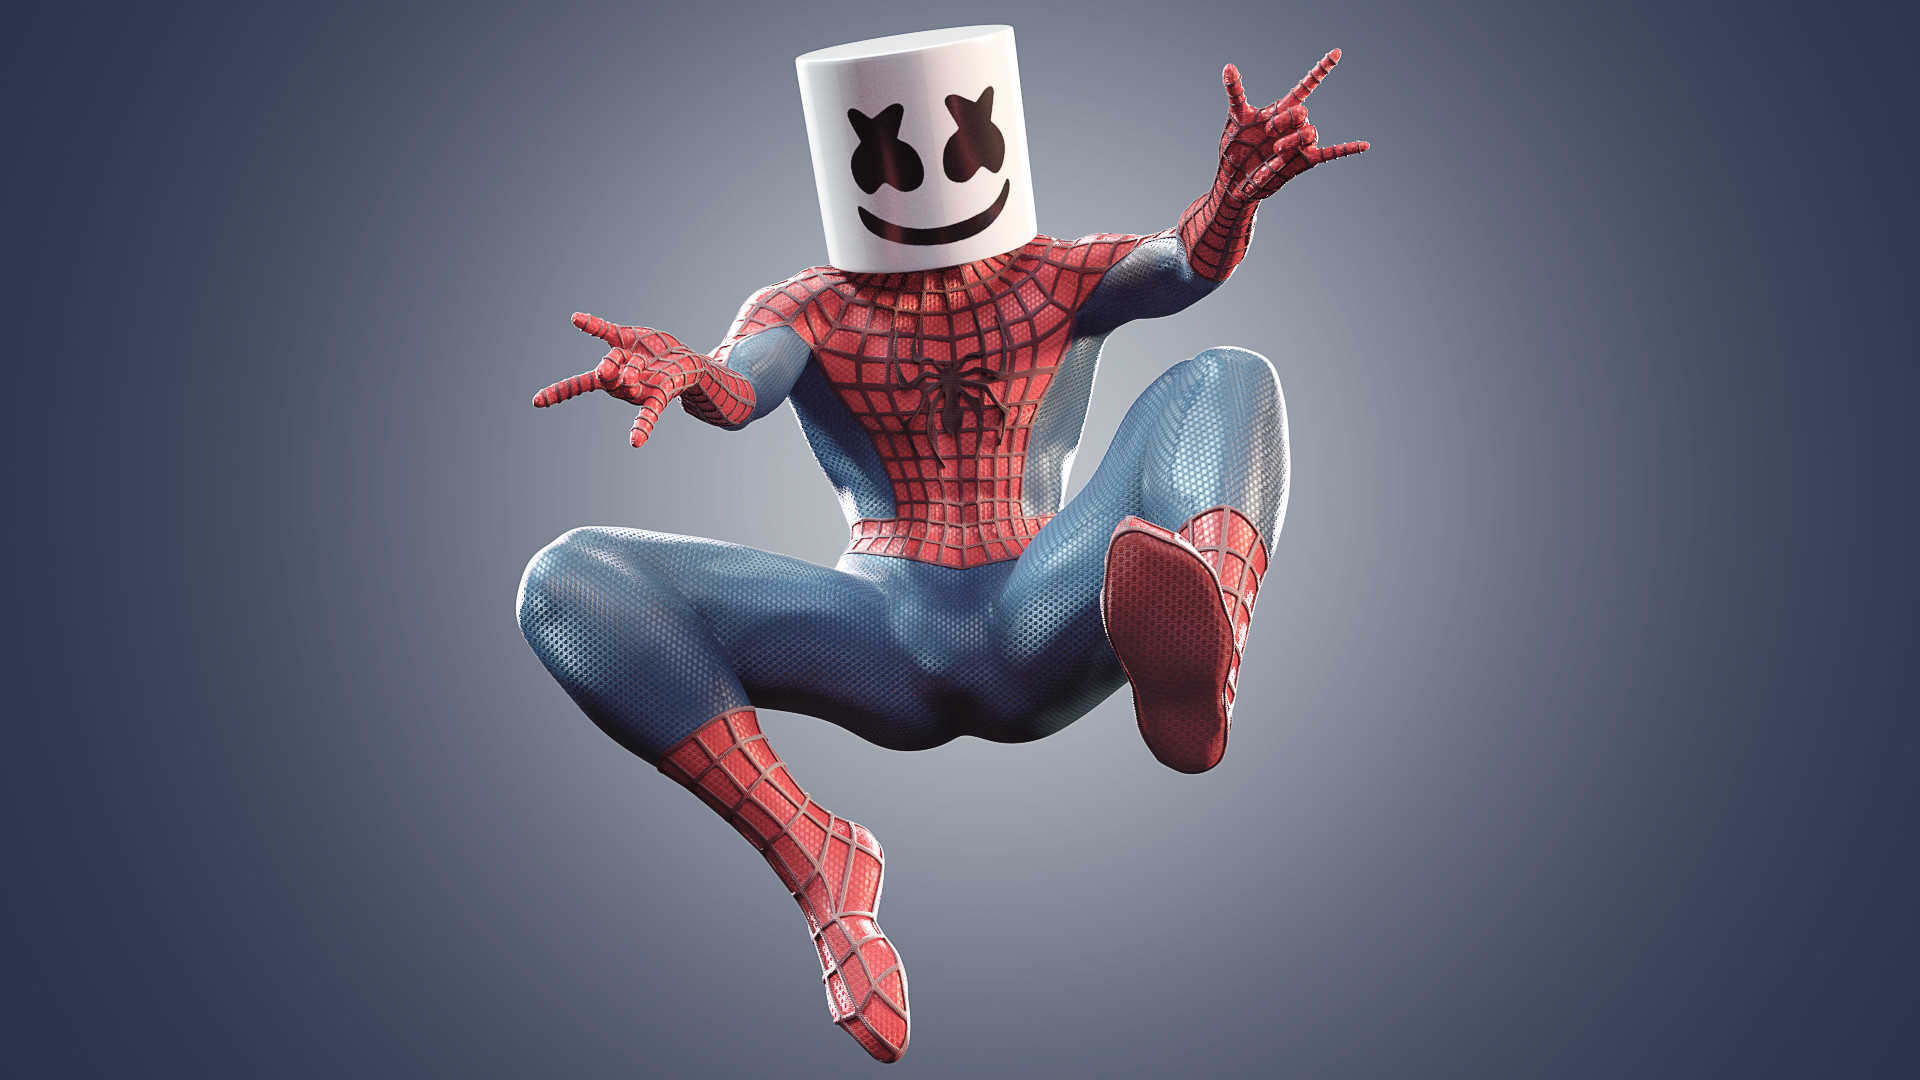 X marshmello spiderman moto gx xperia zz pactgalaxy snote iinexus hd k wallpapers images backgrounds photos and pictures